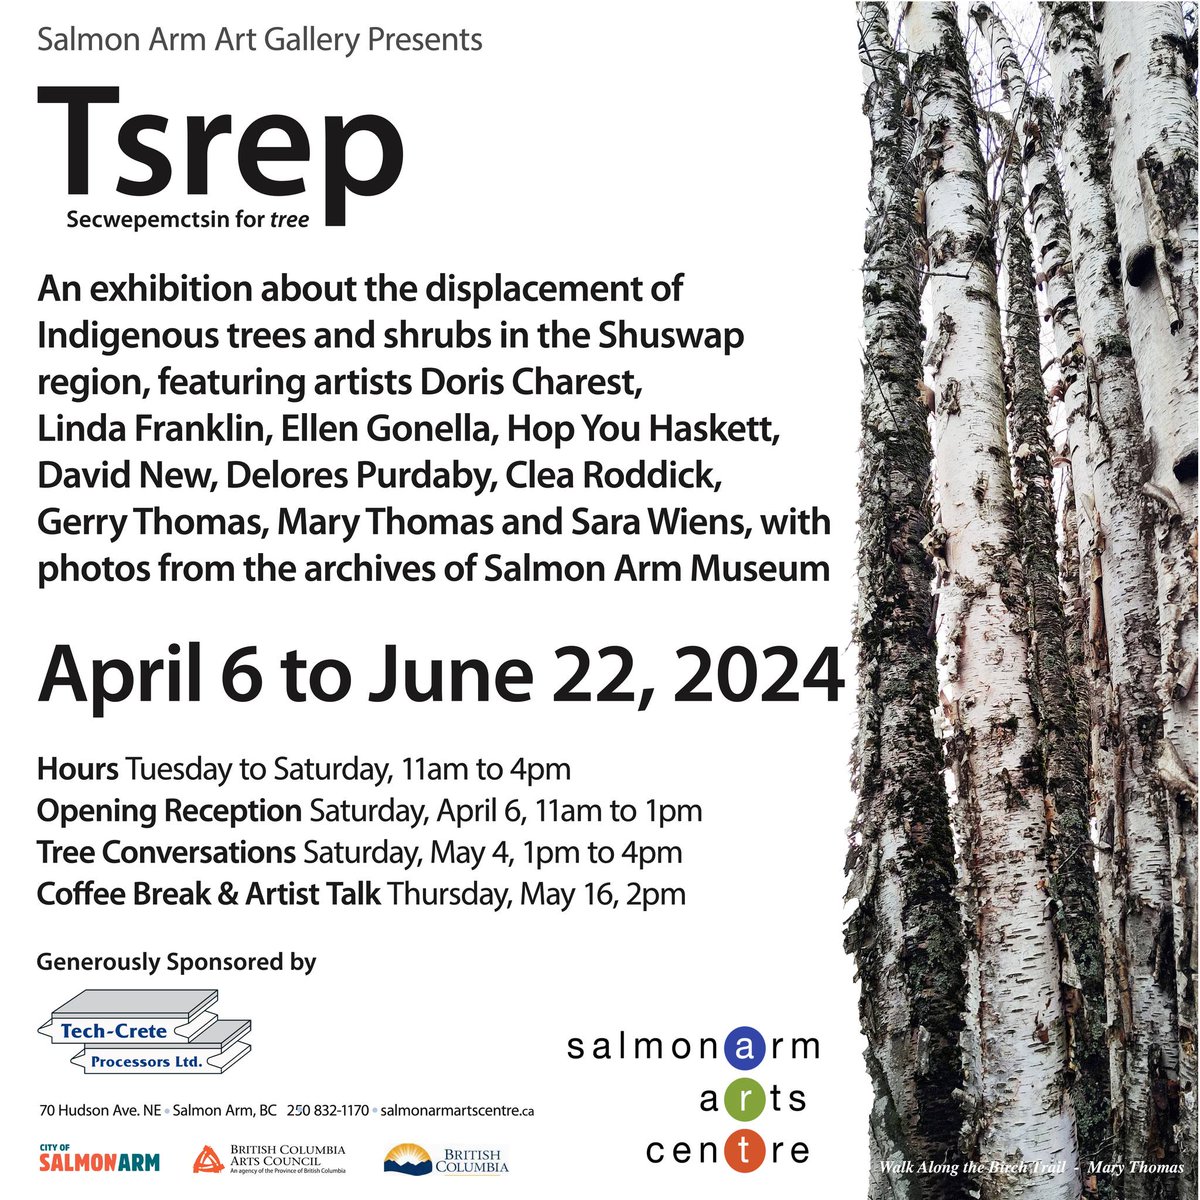 🌿🖼️Join us tomorrow at the Salmon Arm Arts Centre for the opening of 'Tsrep' an exhibition on displaced Indigenous trees and shrubs in the Shuswap. For more information, visit salmonarmartscentre.ca
#SalmonArm #Events #VisitorInfo #Art #IndigenousHeritage #SmallCityBigIdeas